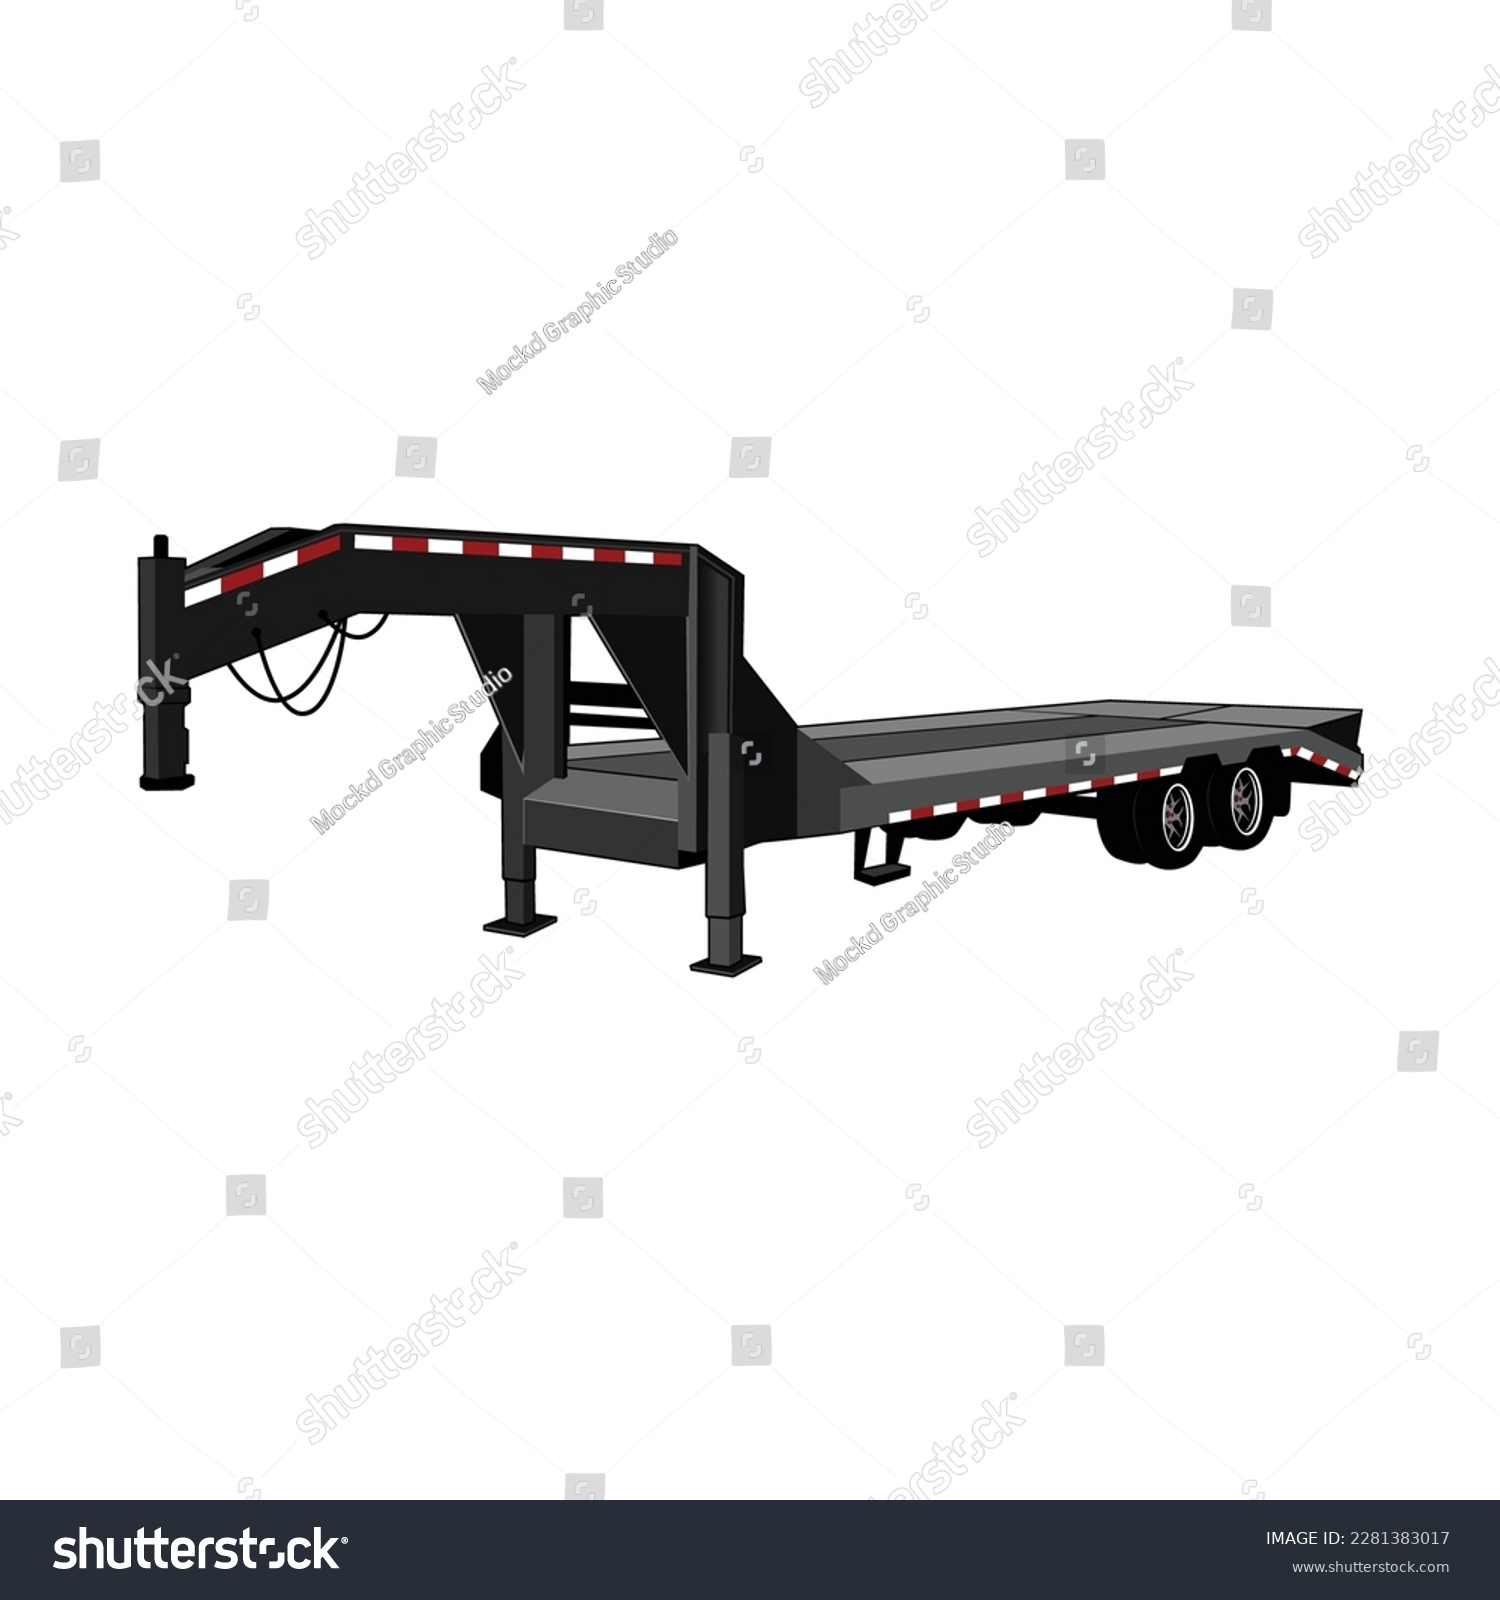 SVG of Big Tex Trailers vector Design isolated on white background svg